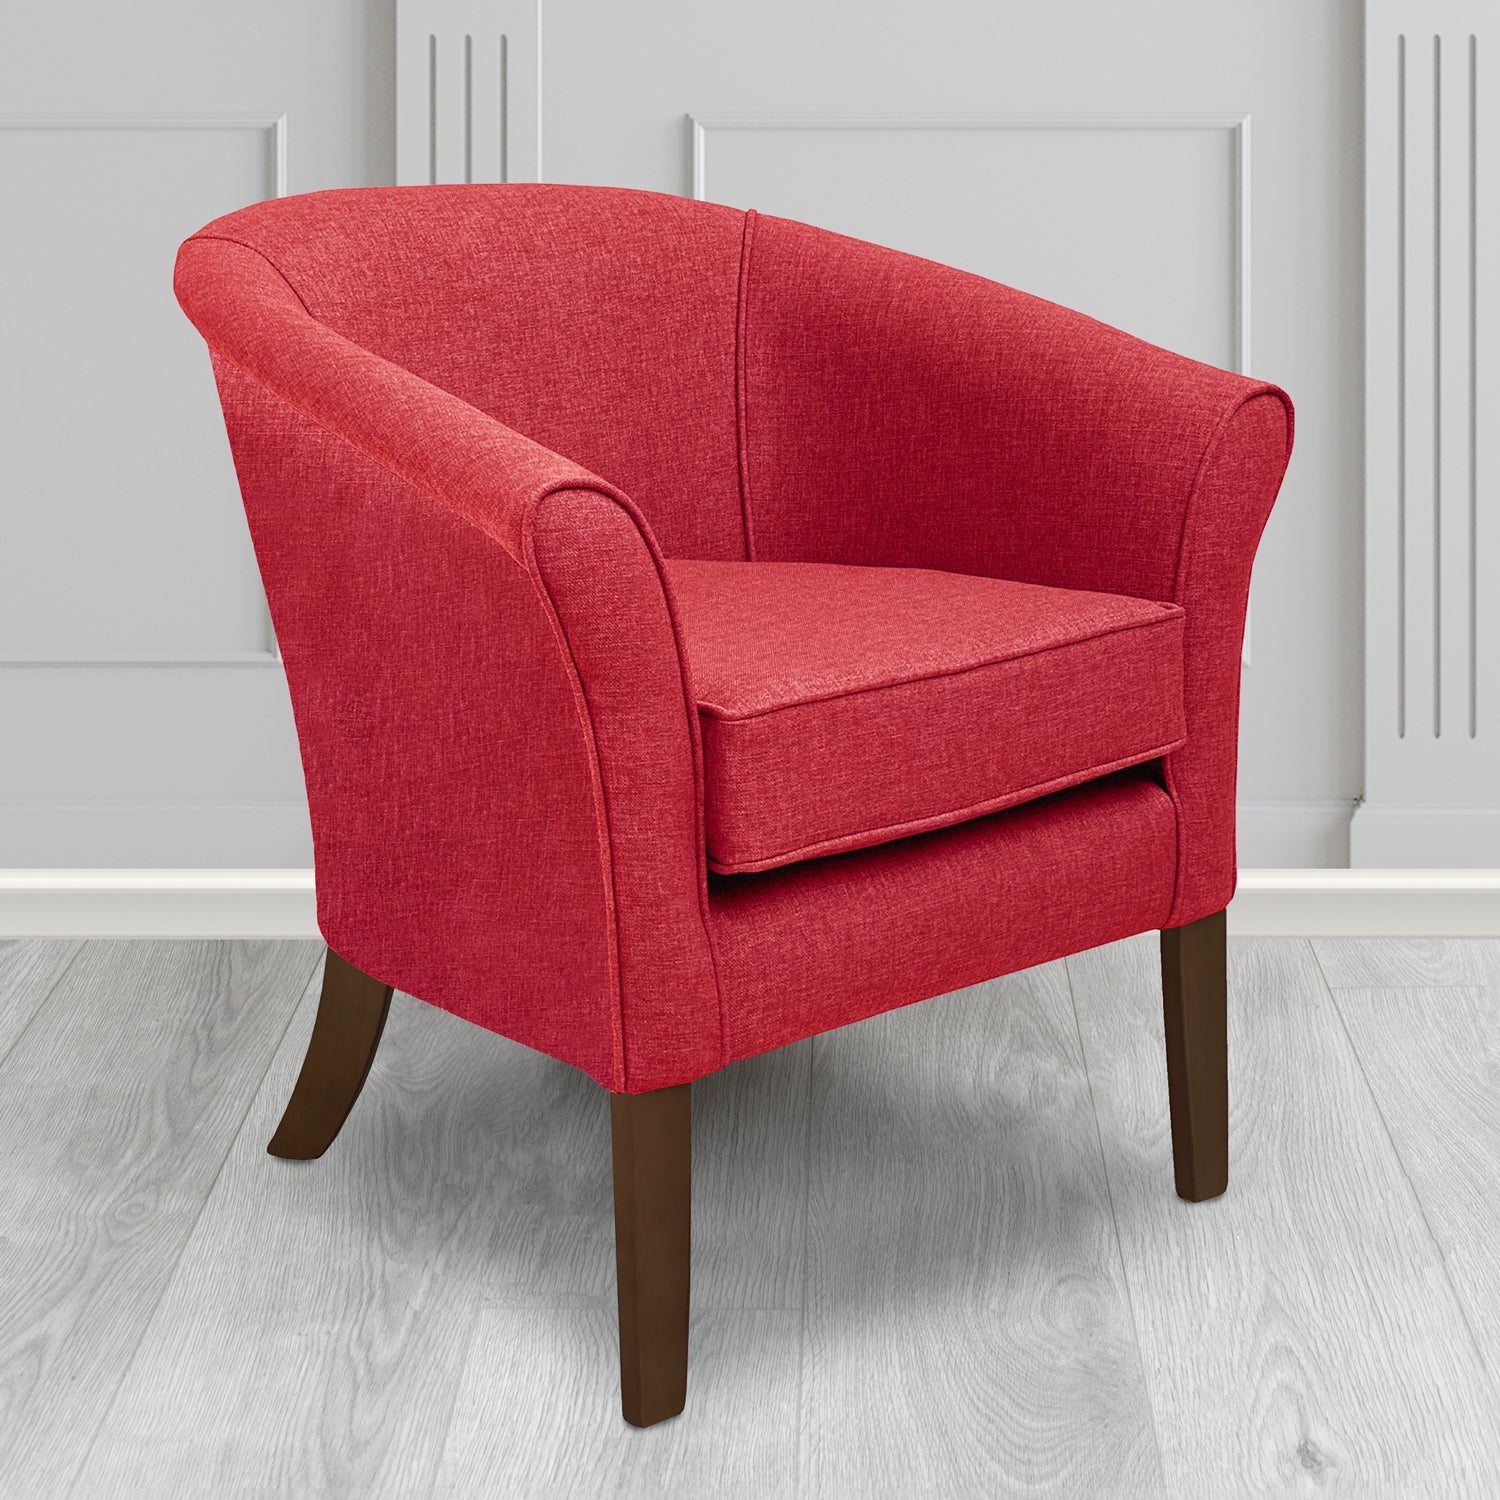 Aspen Tub Chair in Marna 400 Red Crib 5 Fabric - Antimicrobial, Stain Resistant & Waterproof - The Tub Chair Shop